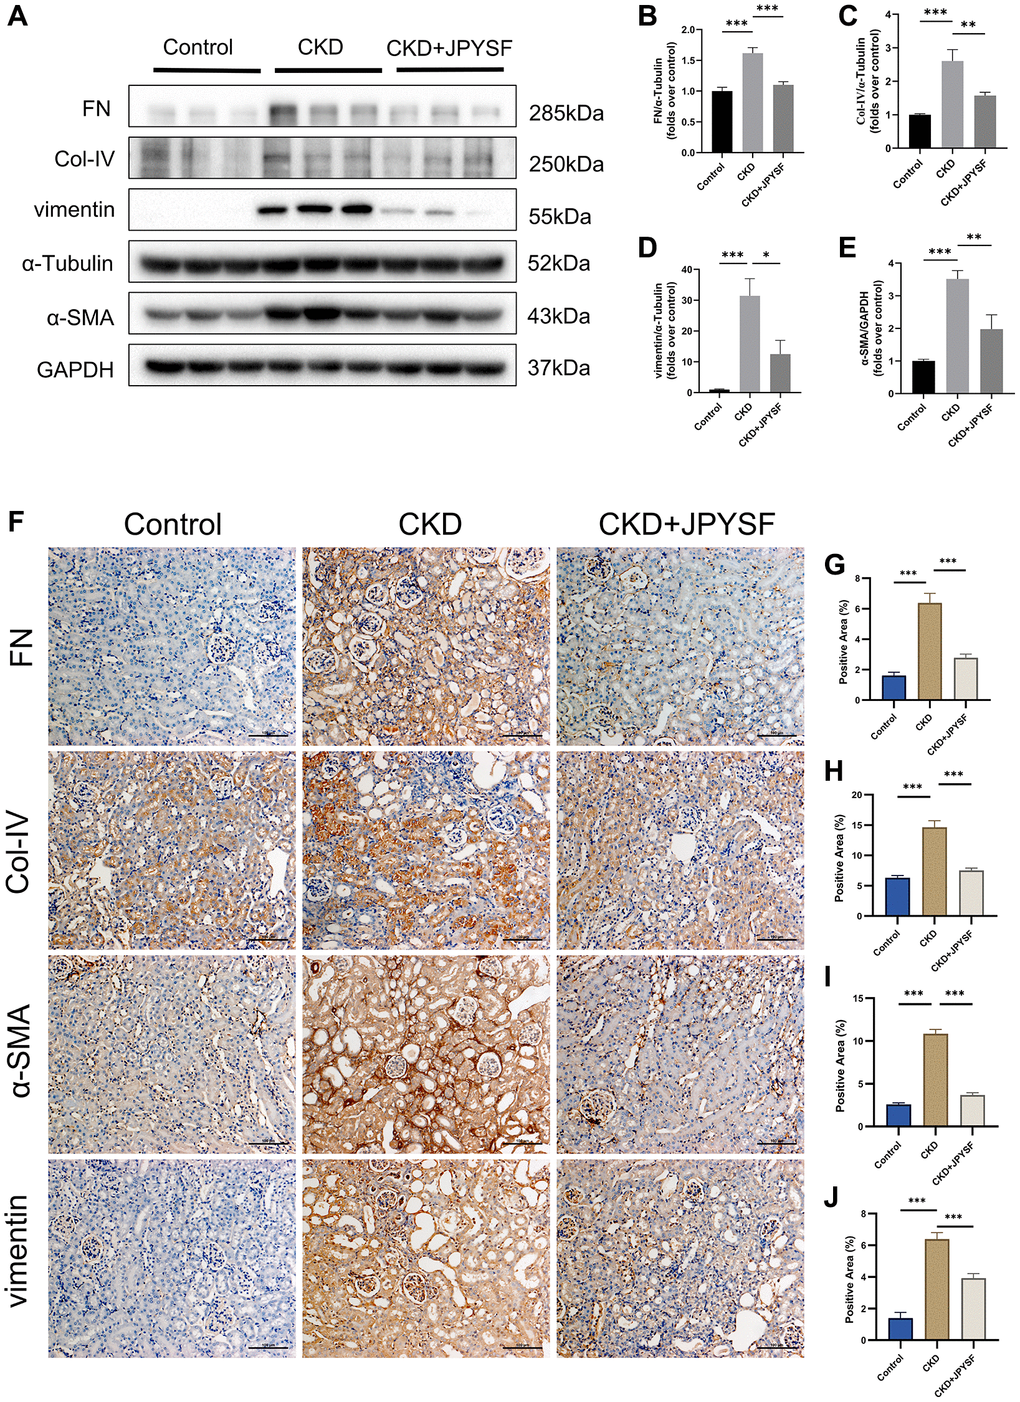 The effects of JPYSF on renal fibrosis in CKD mice. (A) Representative Western blot images of FN, Col-IV, α-SMA, and vimentin expression in the kidney of mice. (B–E) Quantitative analysis of FN, Col-IV, α-SMA and vimentin normalized to α-Tubulin or GAPDH content (n = 6). (F–J) Representative immunohistochemical images and quantitative analysis of positive staining areas of FN, Col-IV, α-SMA and vimentin in the kidney of mice (n = 3). All images are shown at identical magnification, ×200, scale bar = 100 μm. Data are expressed as mean ± SEM (*p **p ***p 